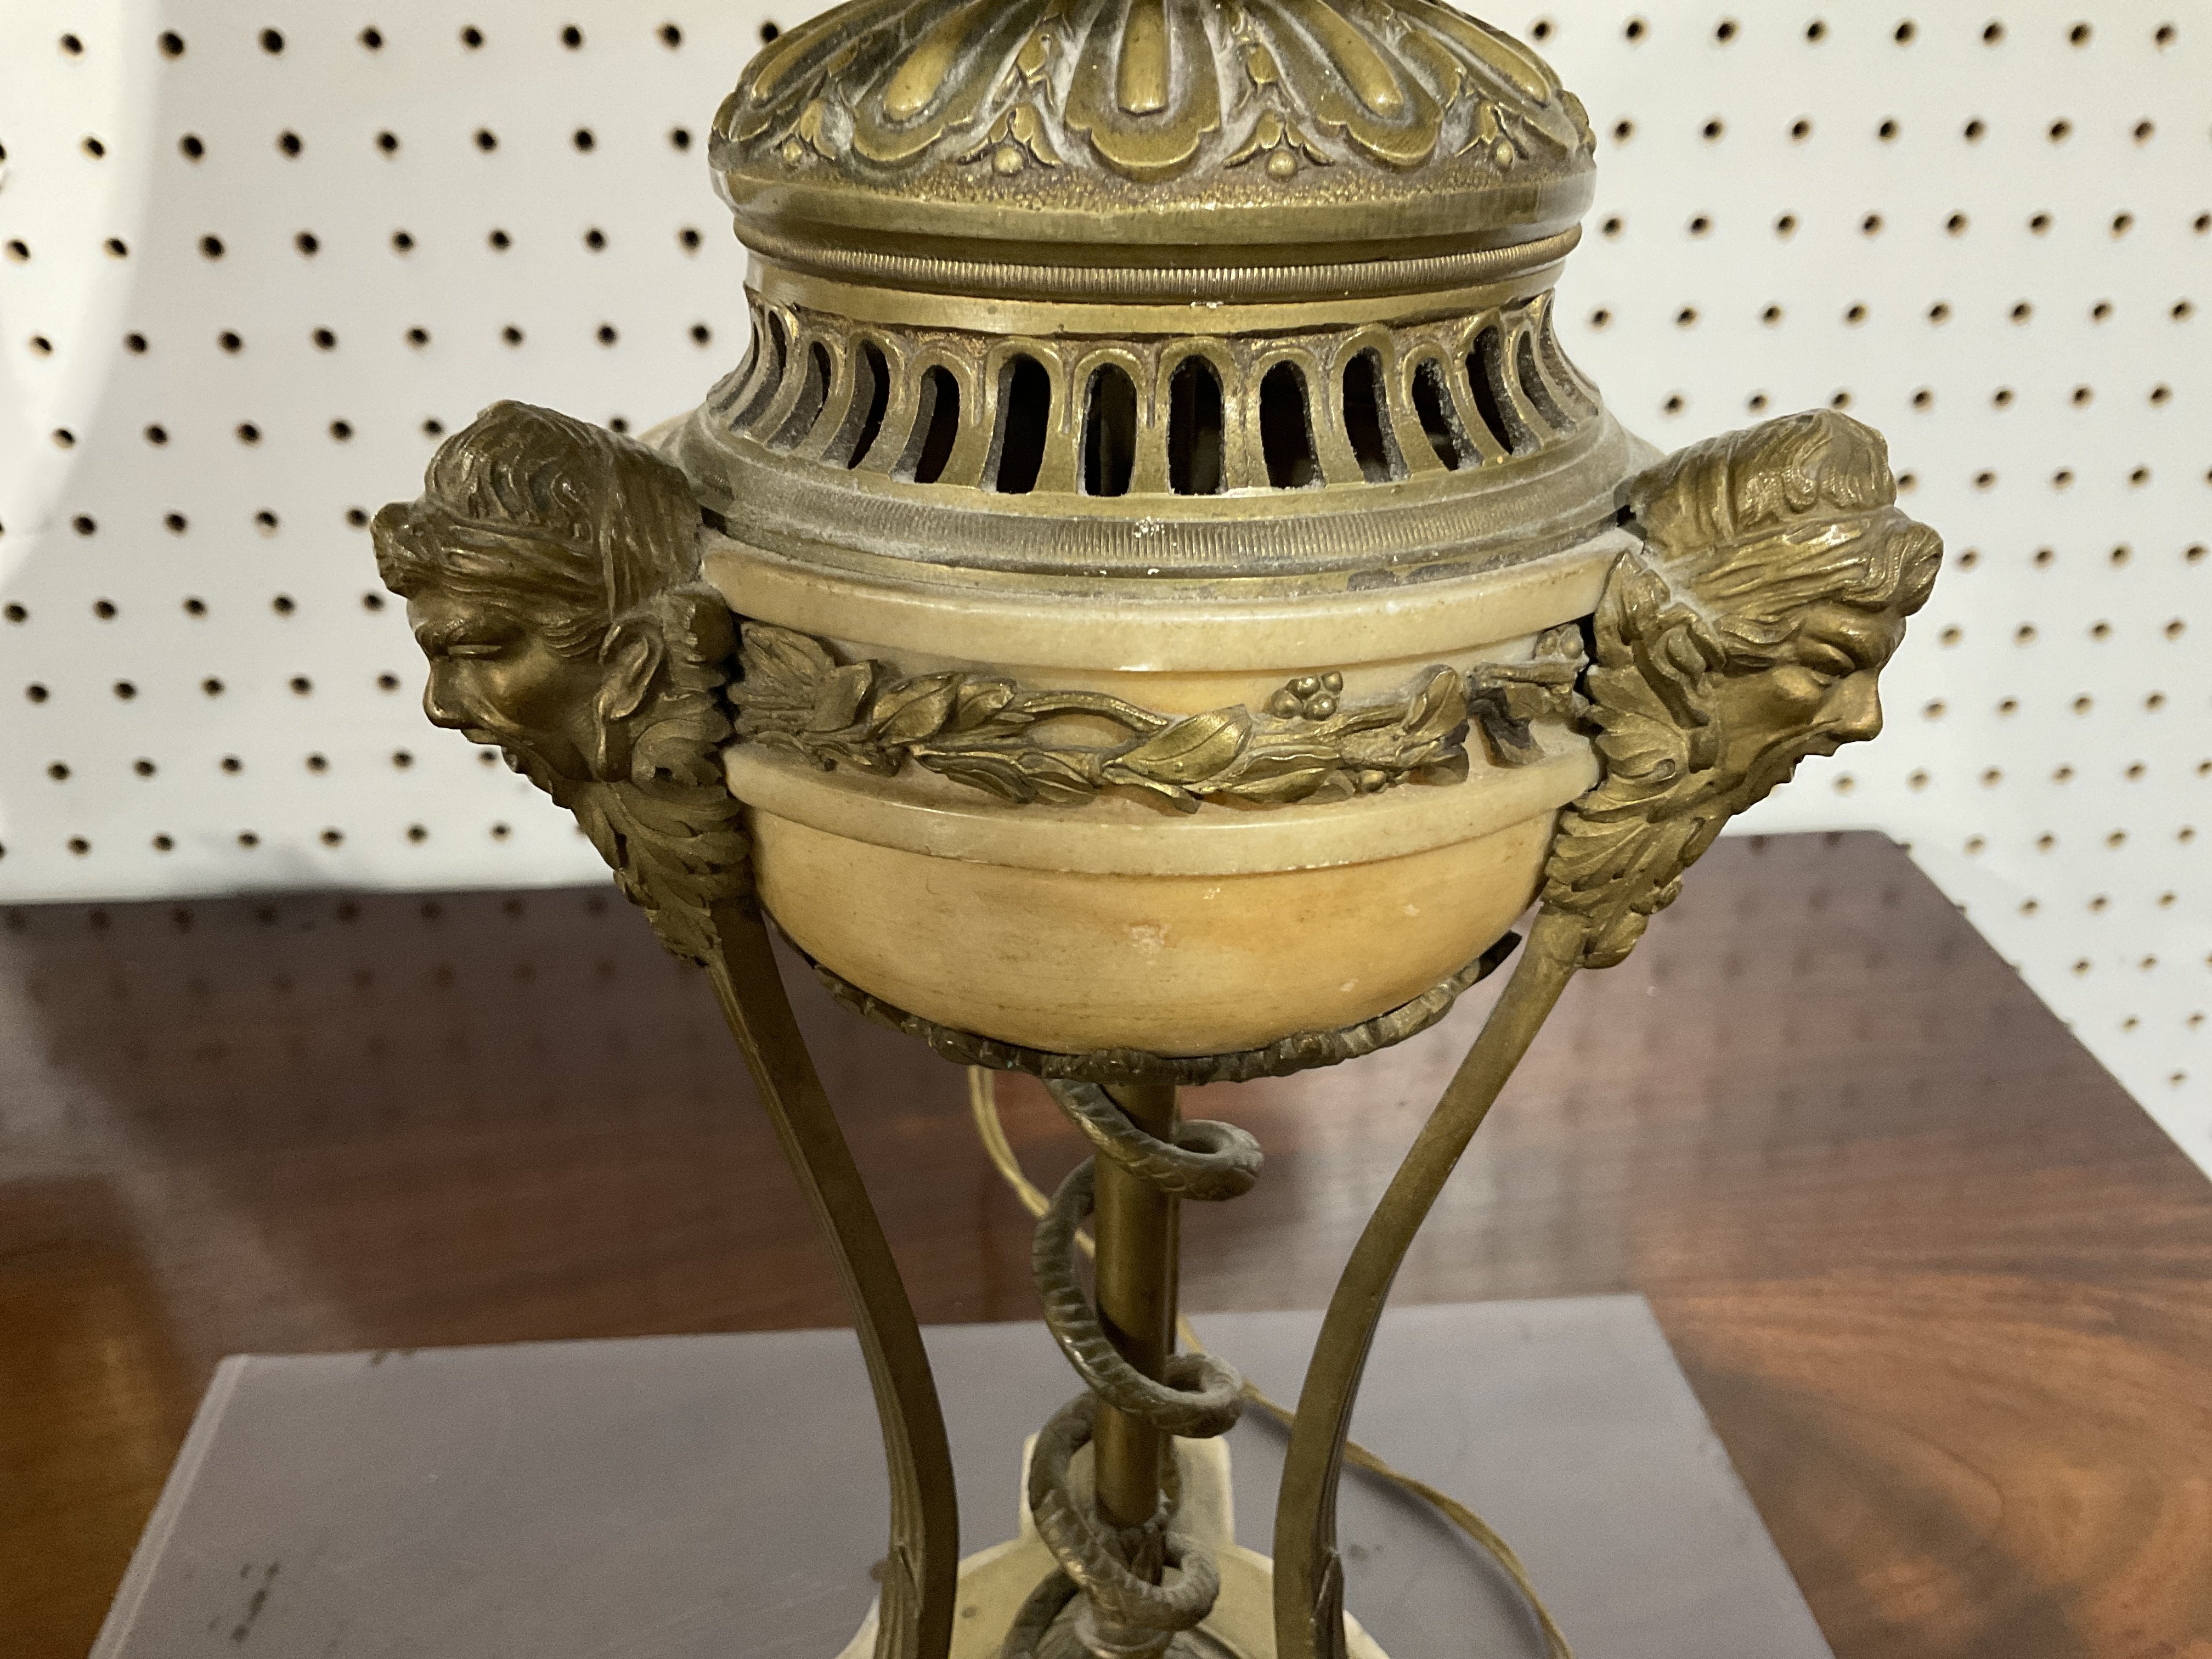 A PAIR OF LOUIS XVI STYLE GILT-METAL MOUNTED ALABASTER ANTHENIENNE TABLE LAMPS (2) - Image 3 of 6